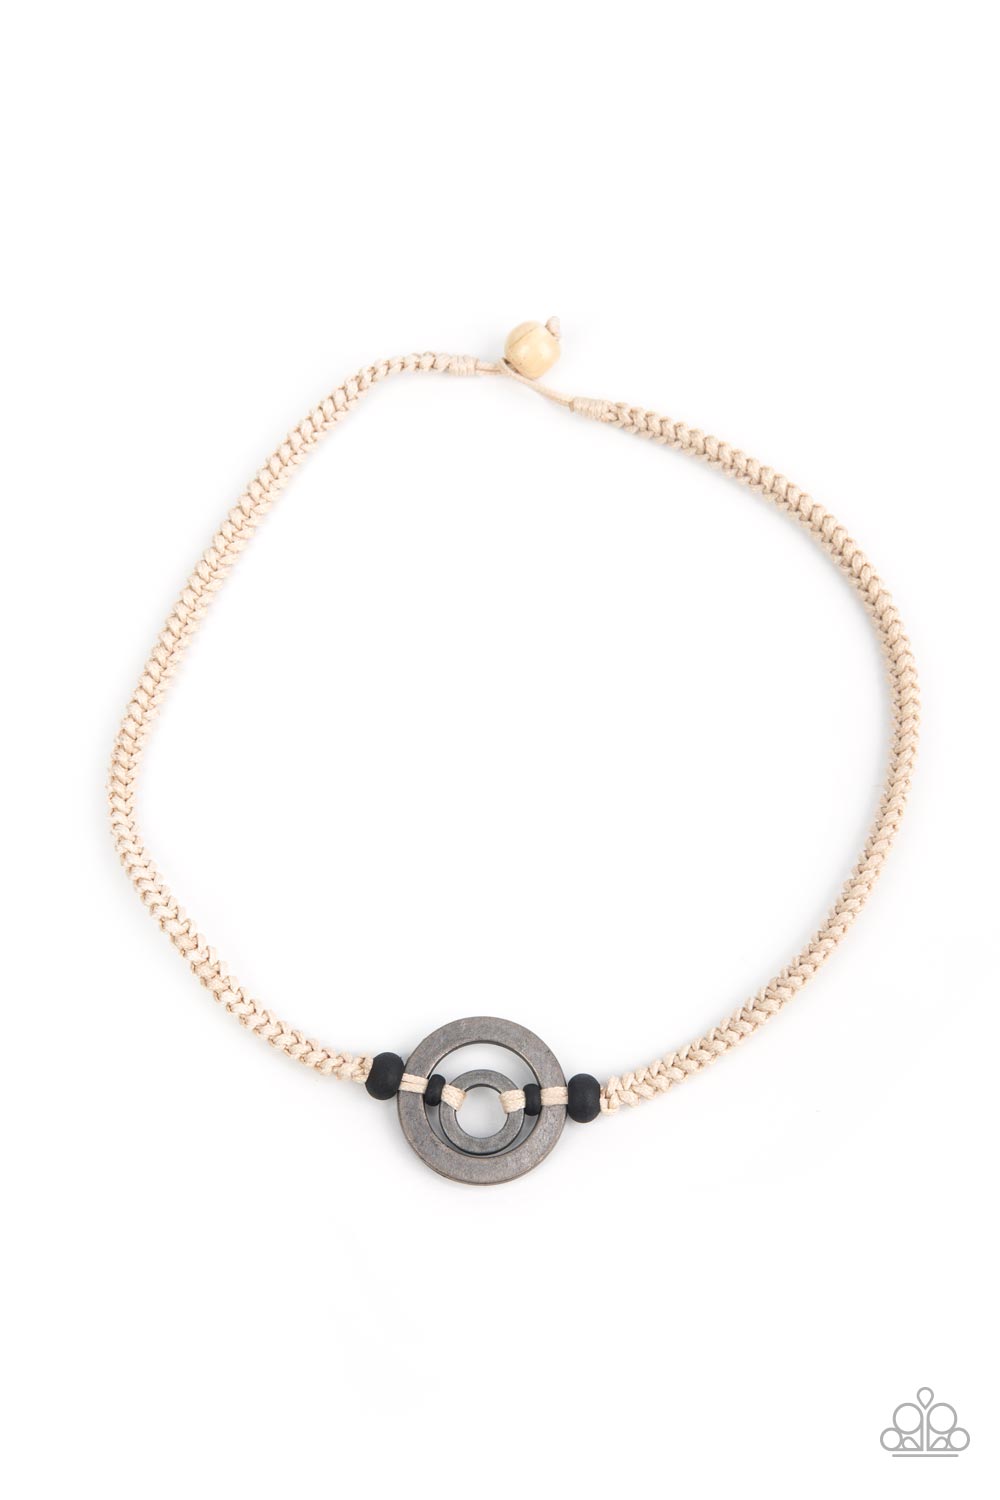 Rural Reef White Necklace